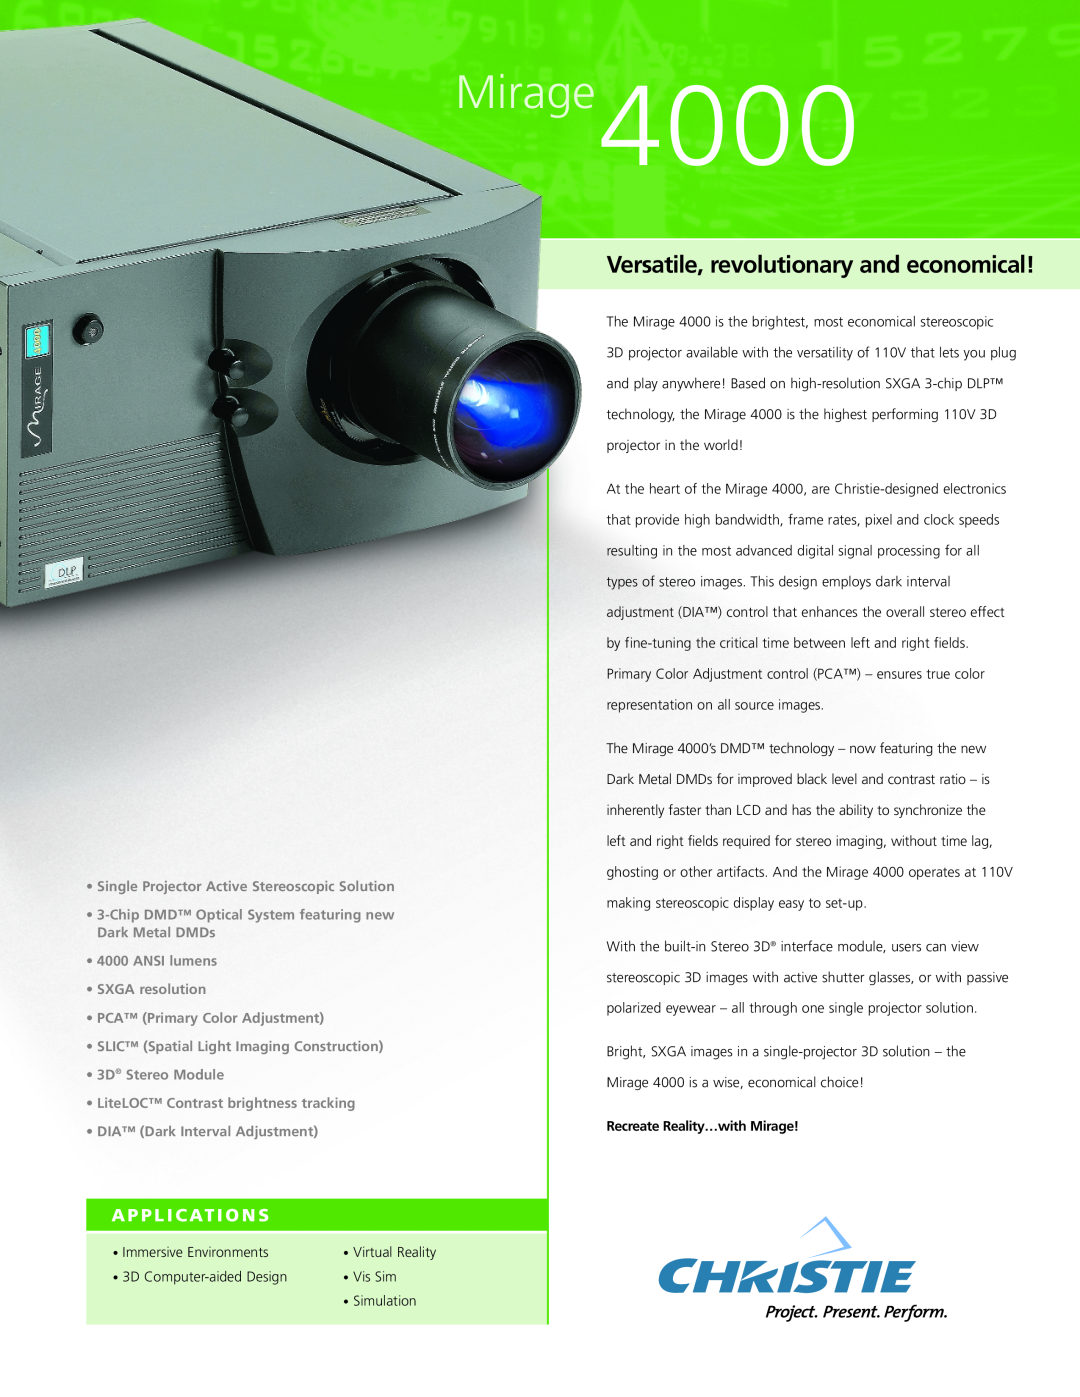 Christie Digital Systems manual A P P L I C At I O N S, Mirage4000, Versatile, revolutionary and economical 